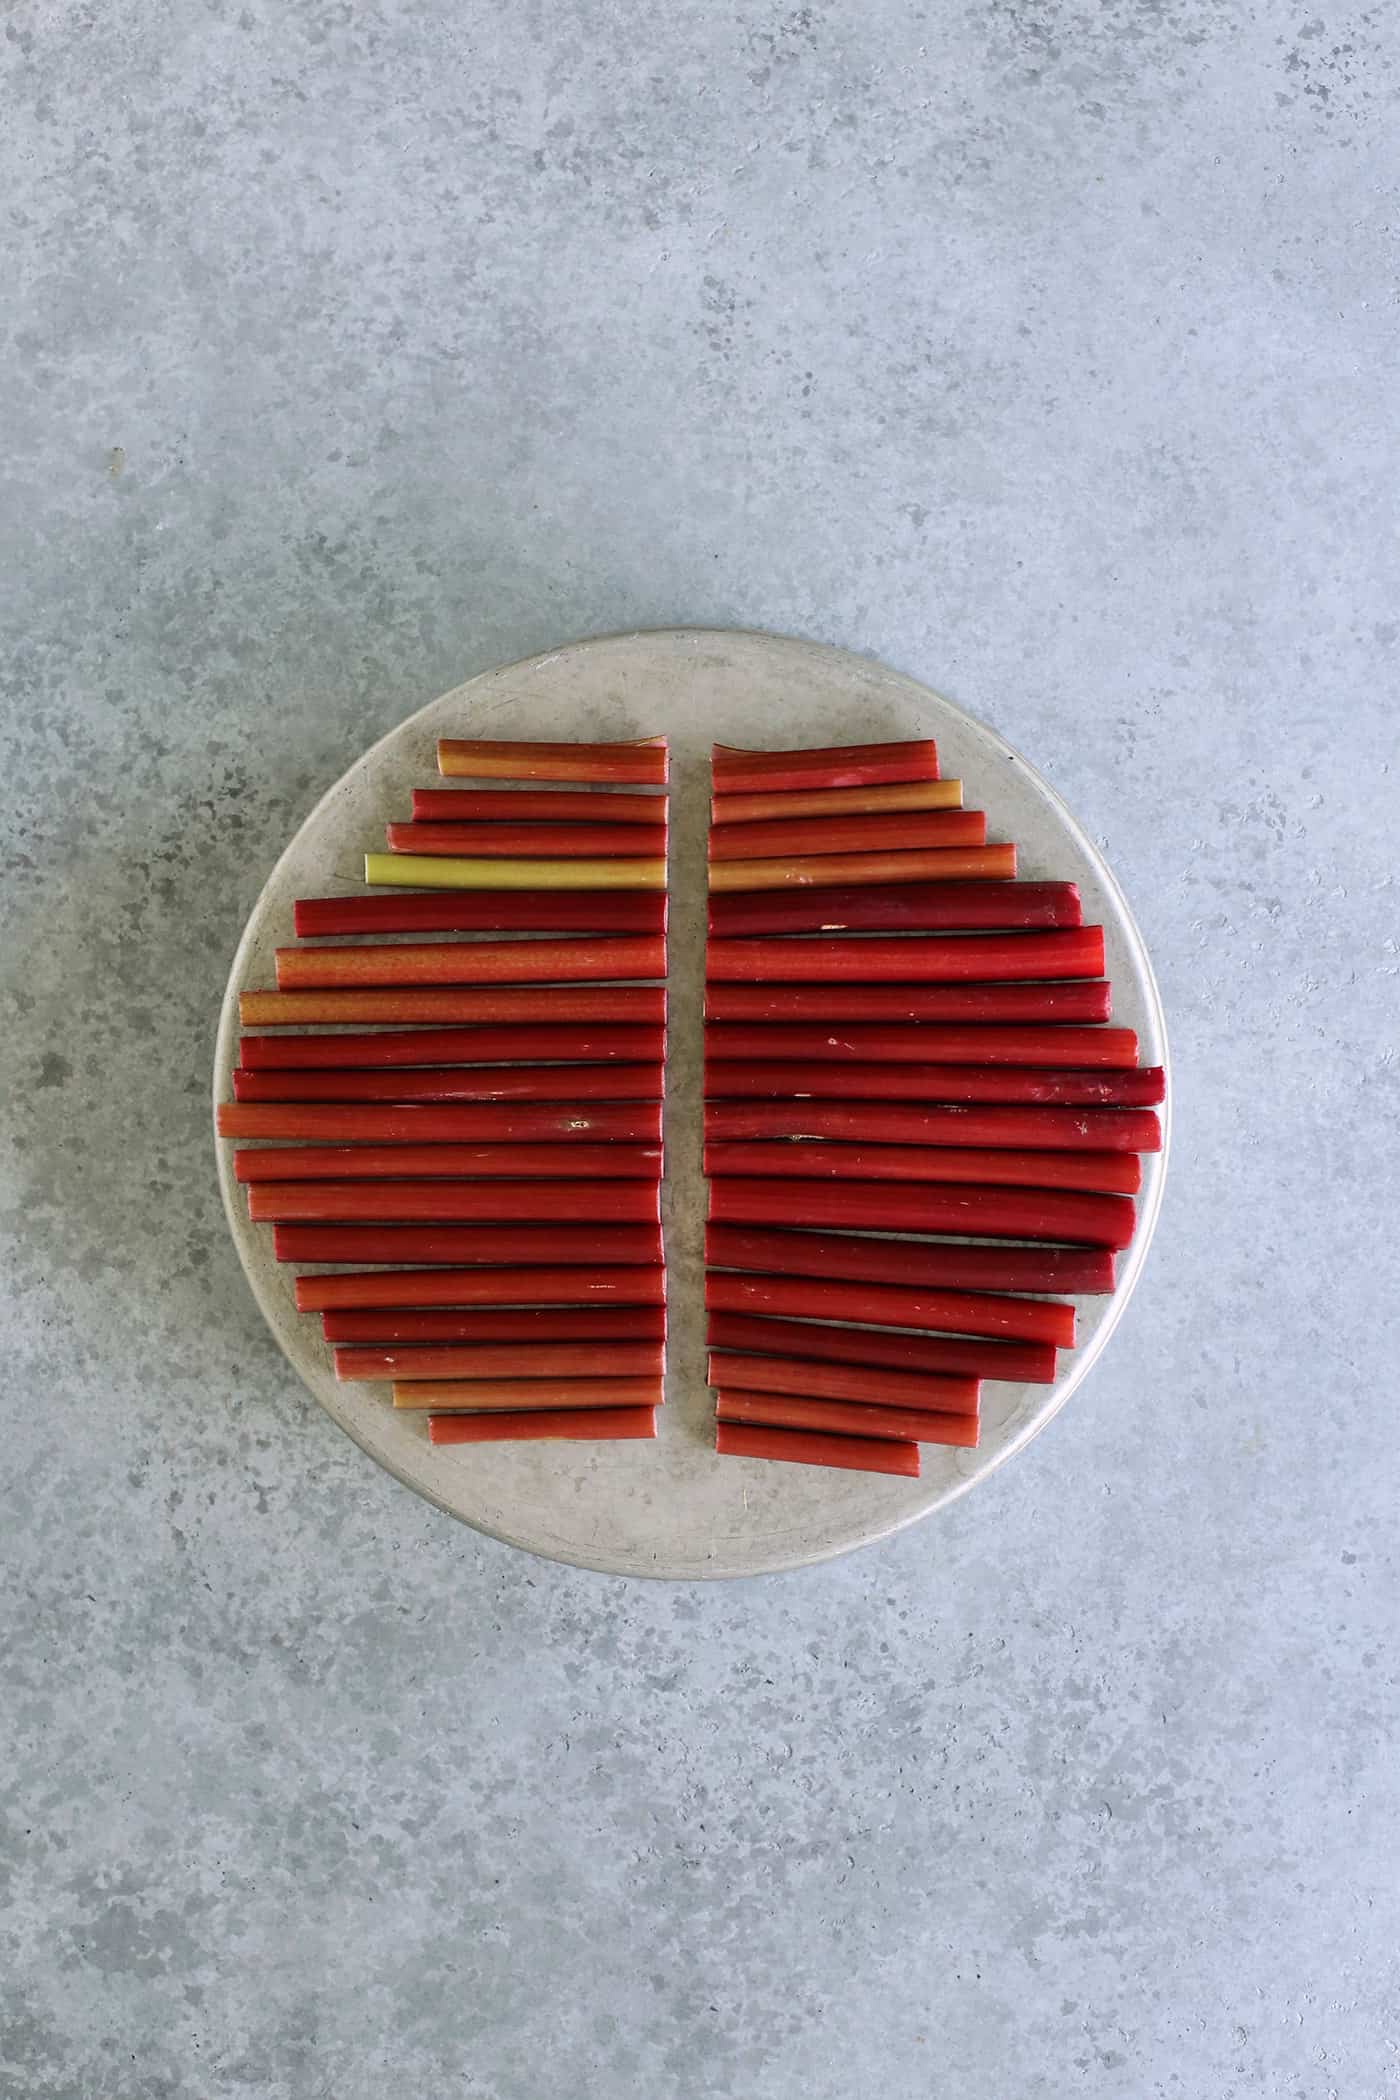 rhubarb lined up on a round cake pan, then cut in half